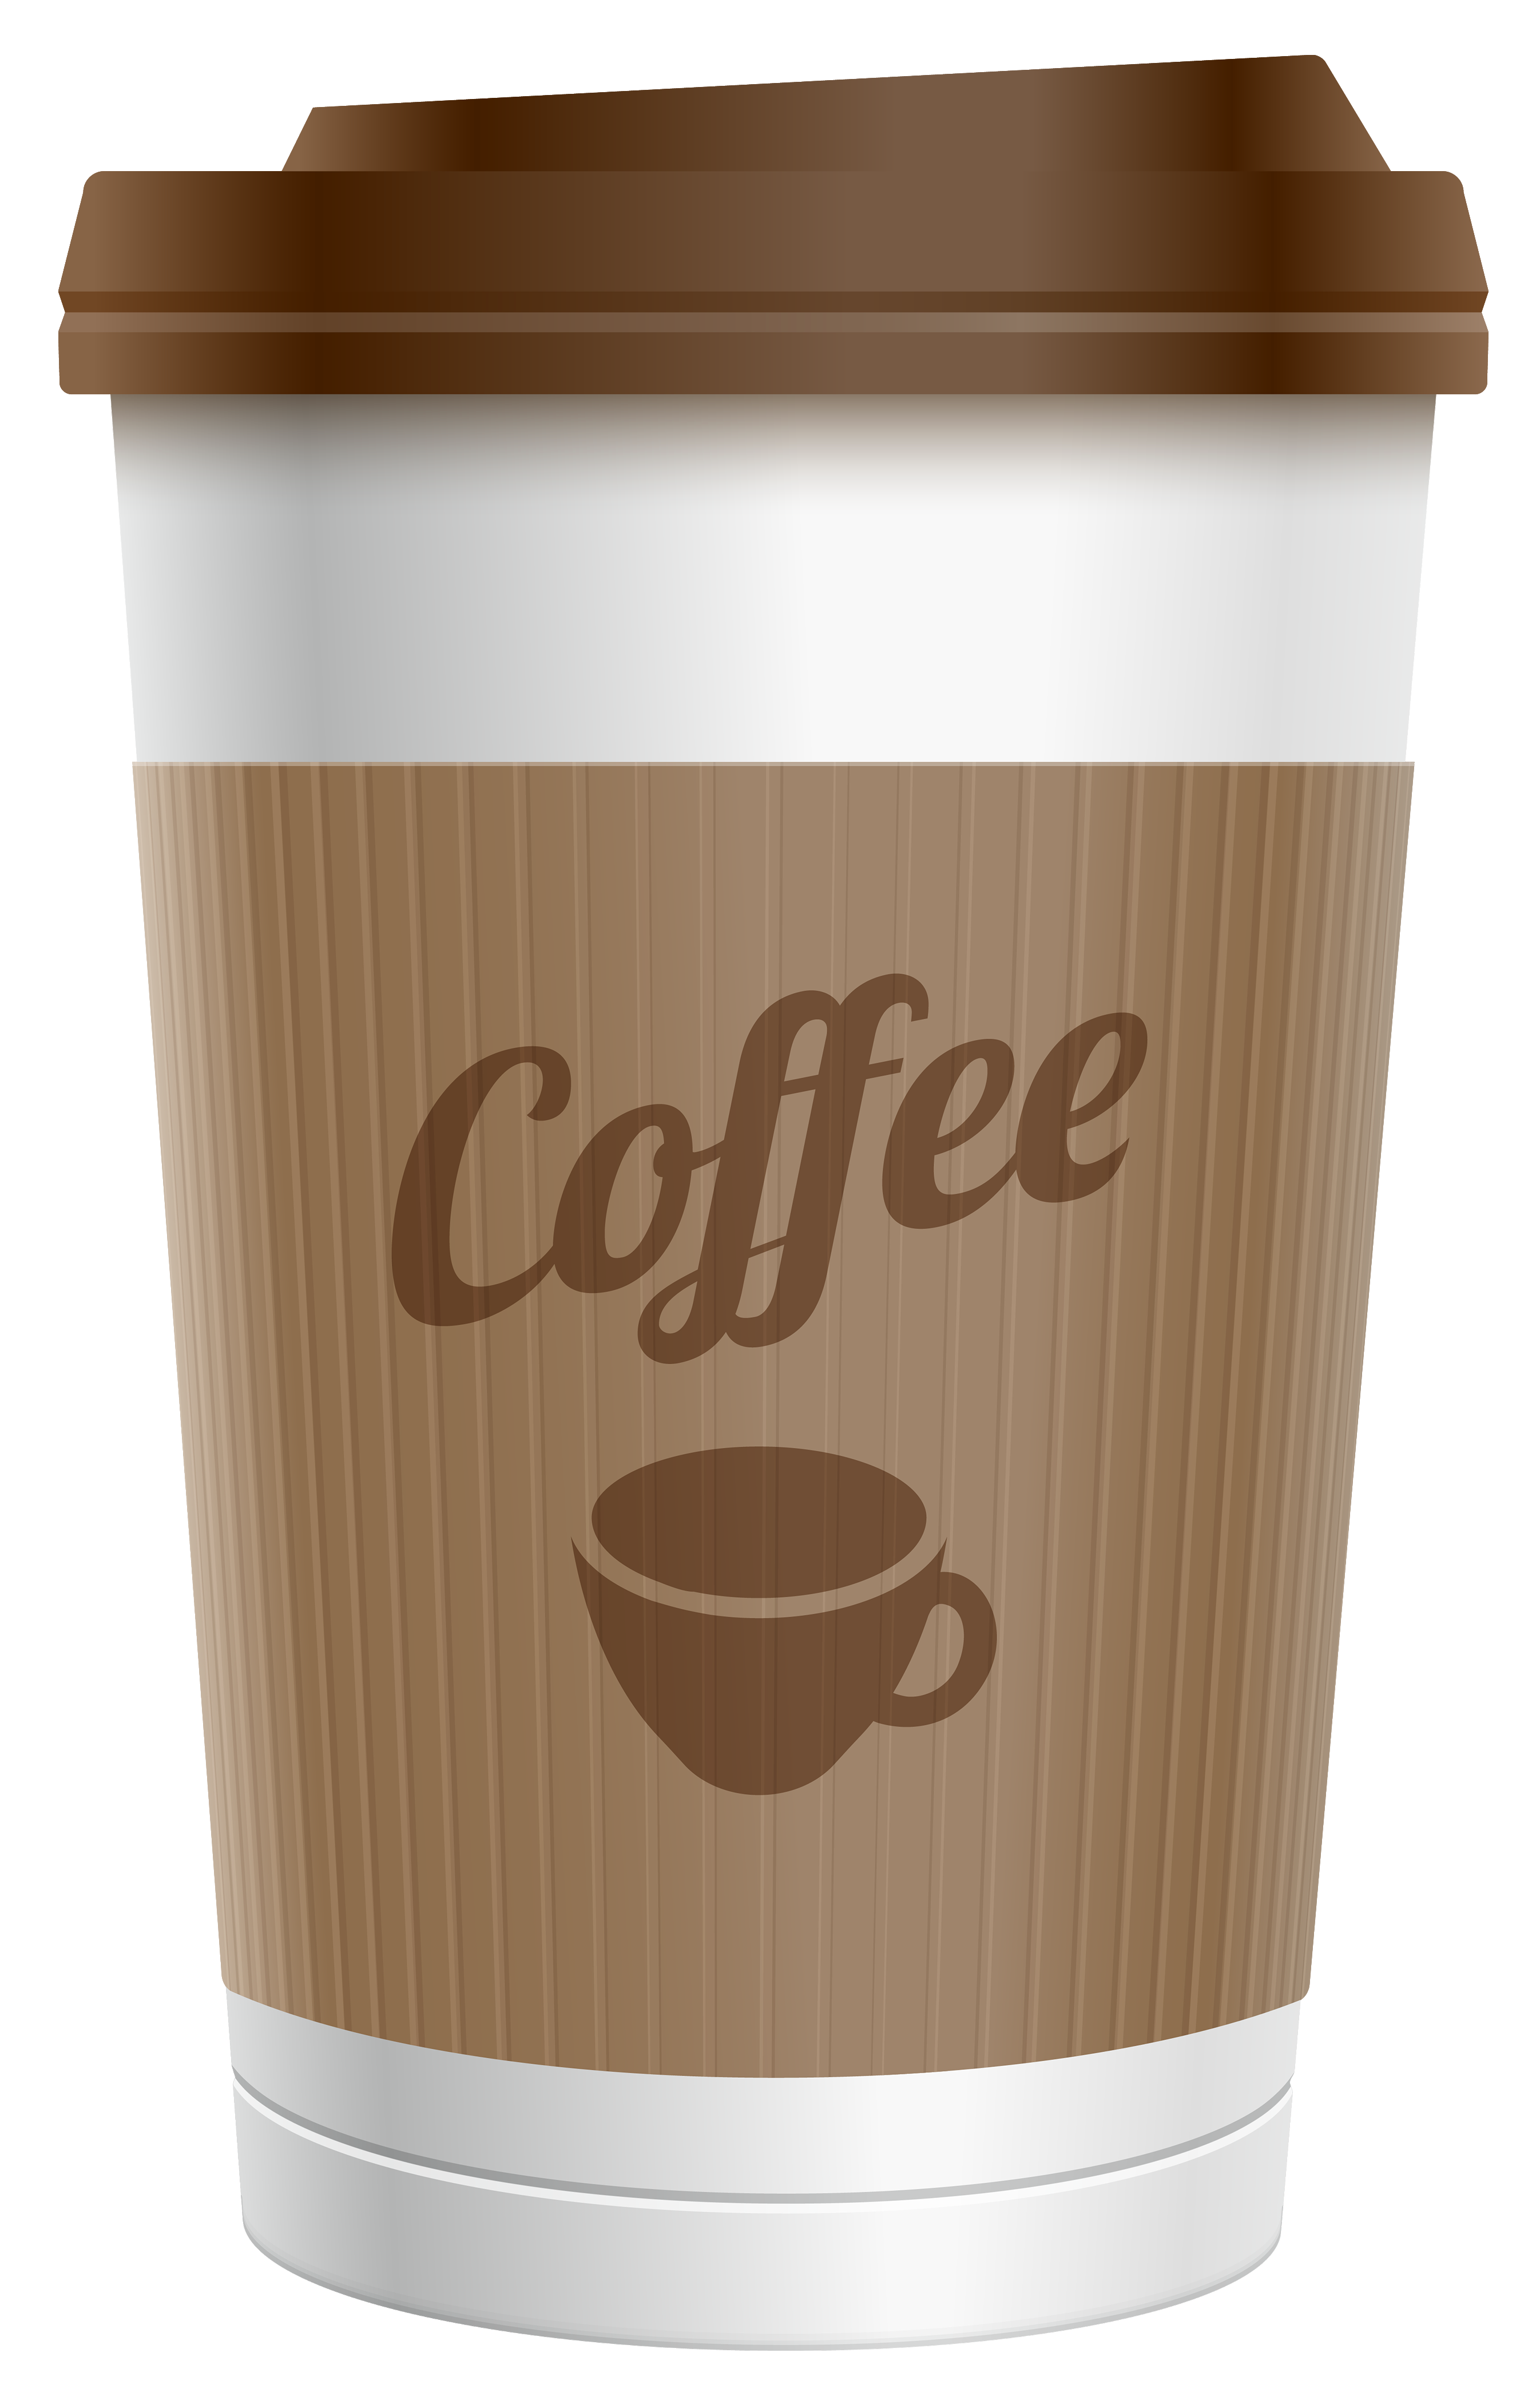 Coffee cup plasticffee cup clipart image